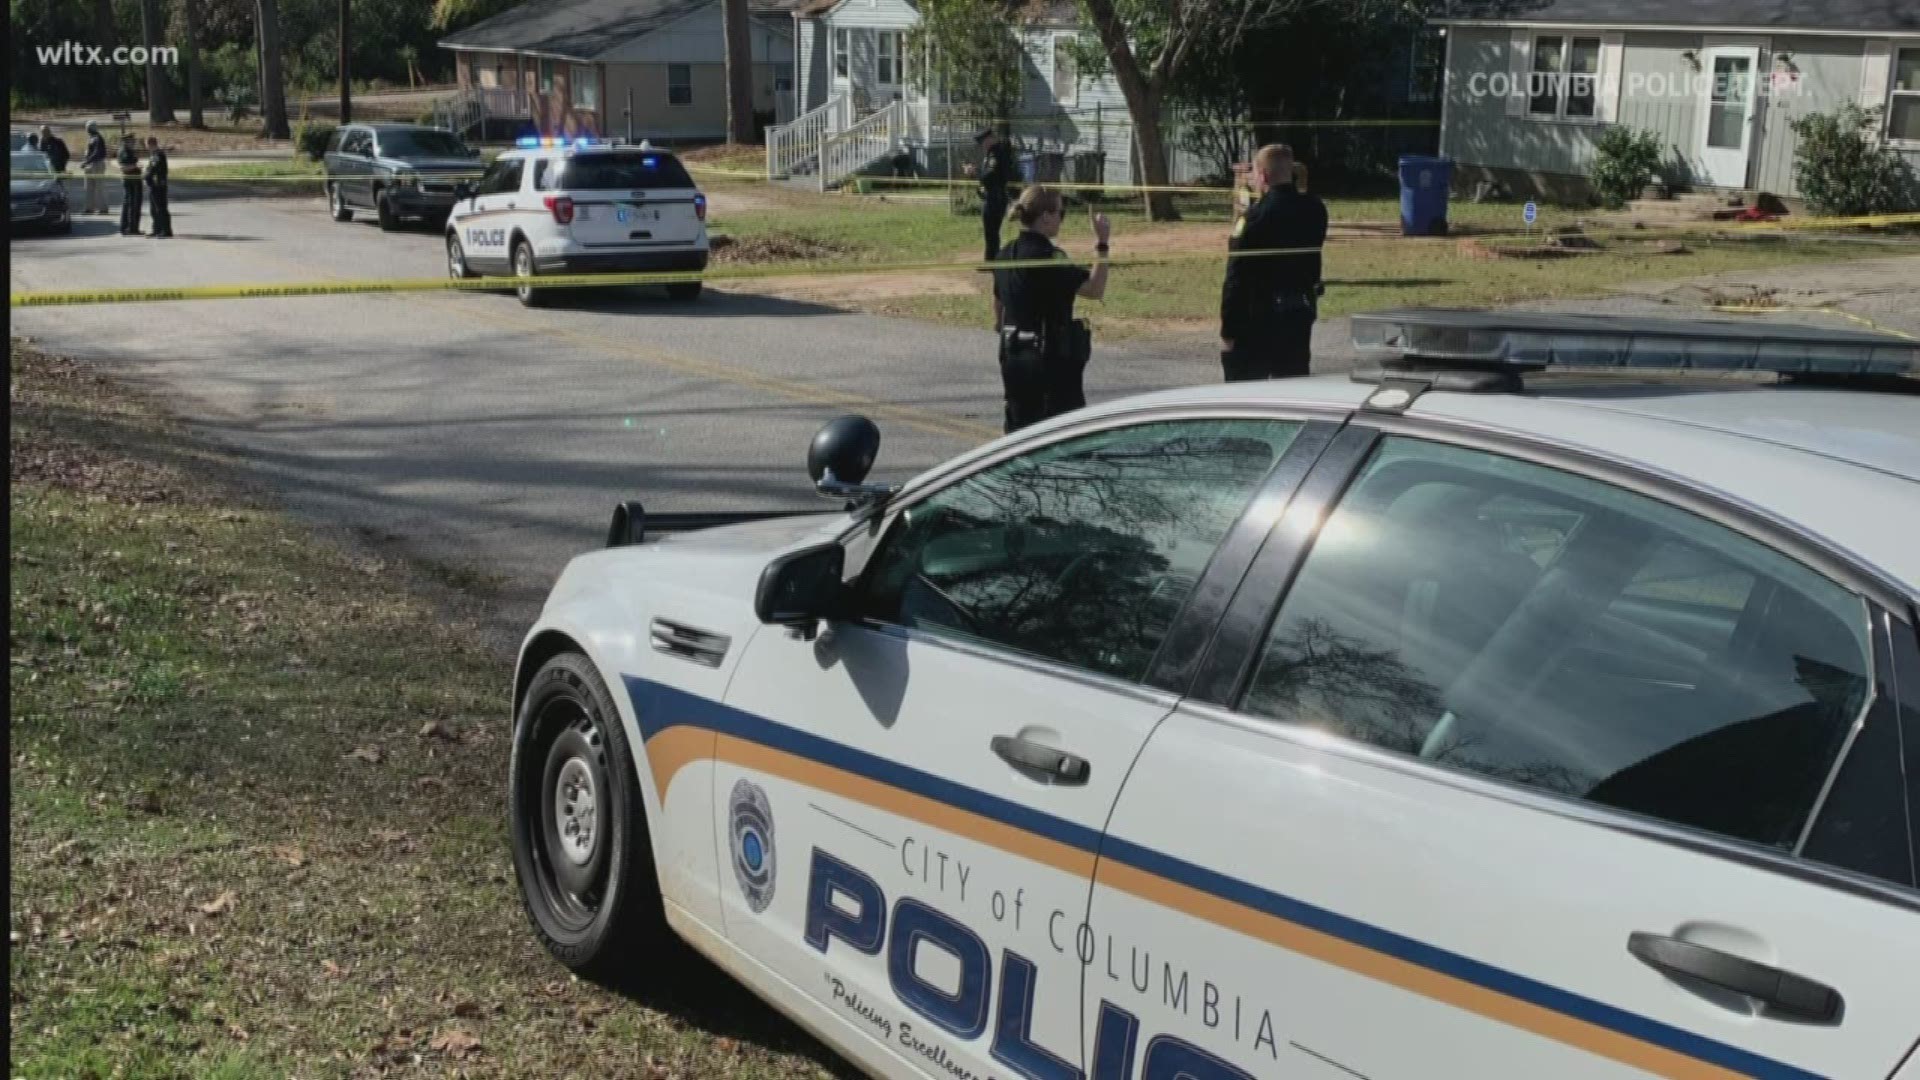 Columbia police say a woman has died after she was shot on North Main Street in Columbia Friday afternoon.